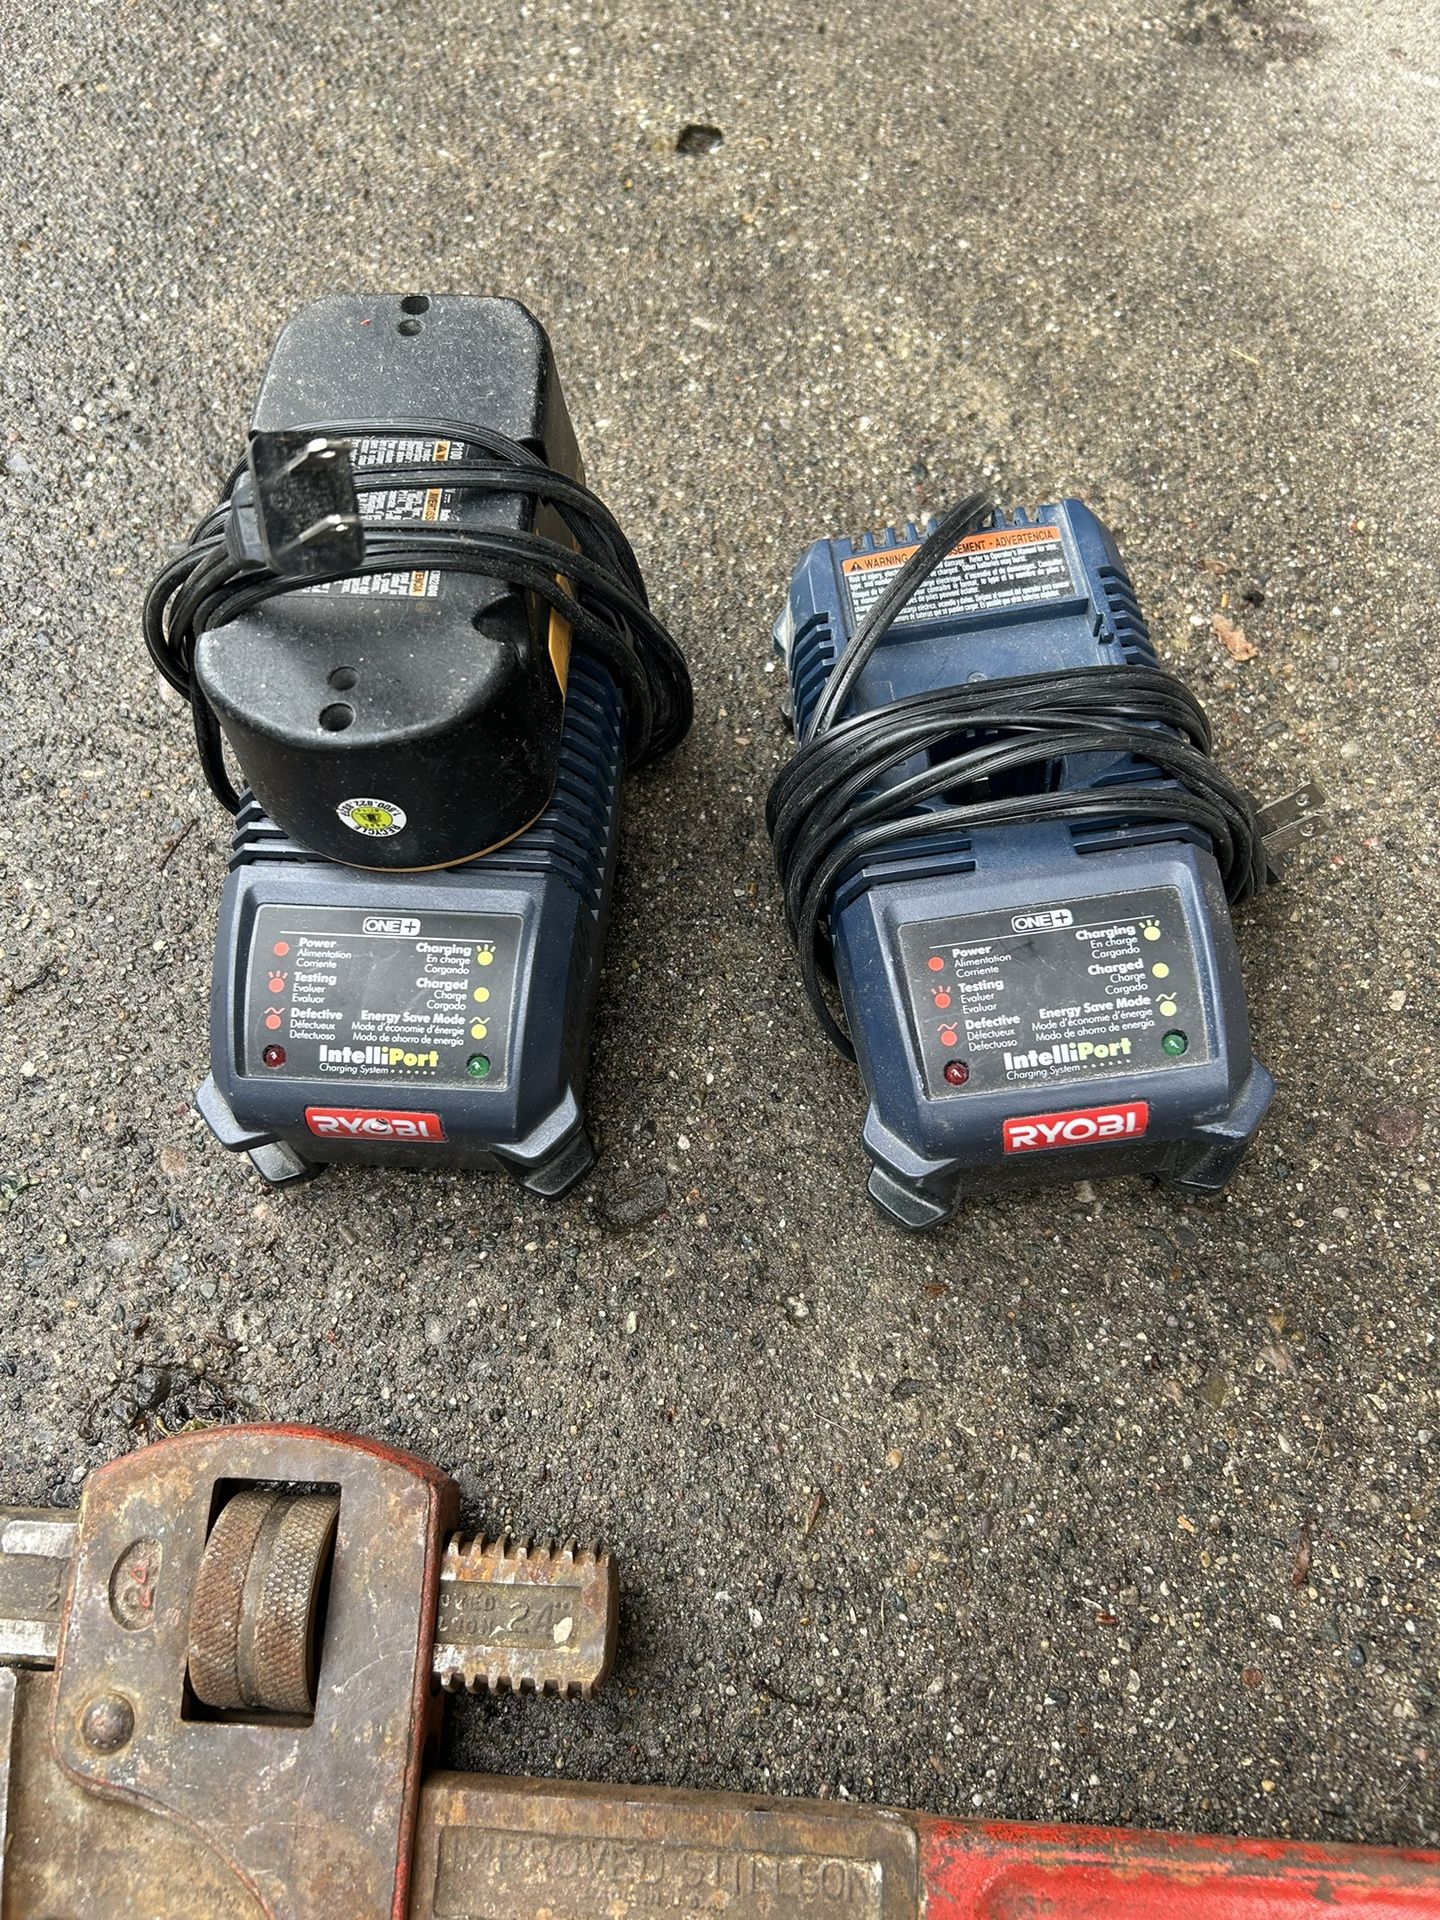 Ryobi plus one chargers and one battery